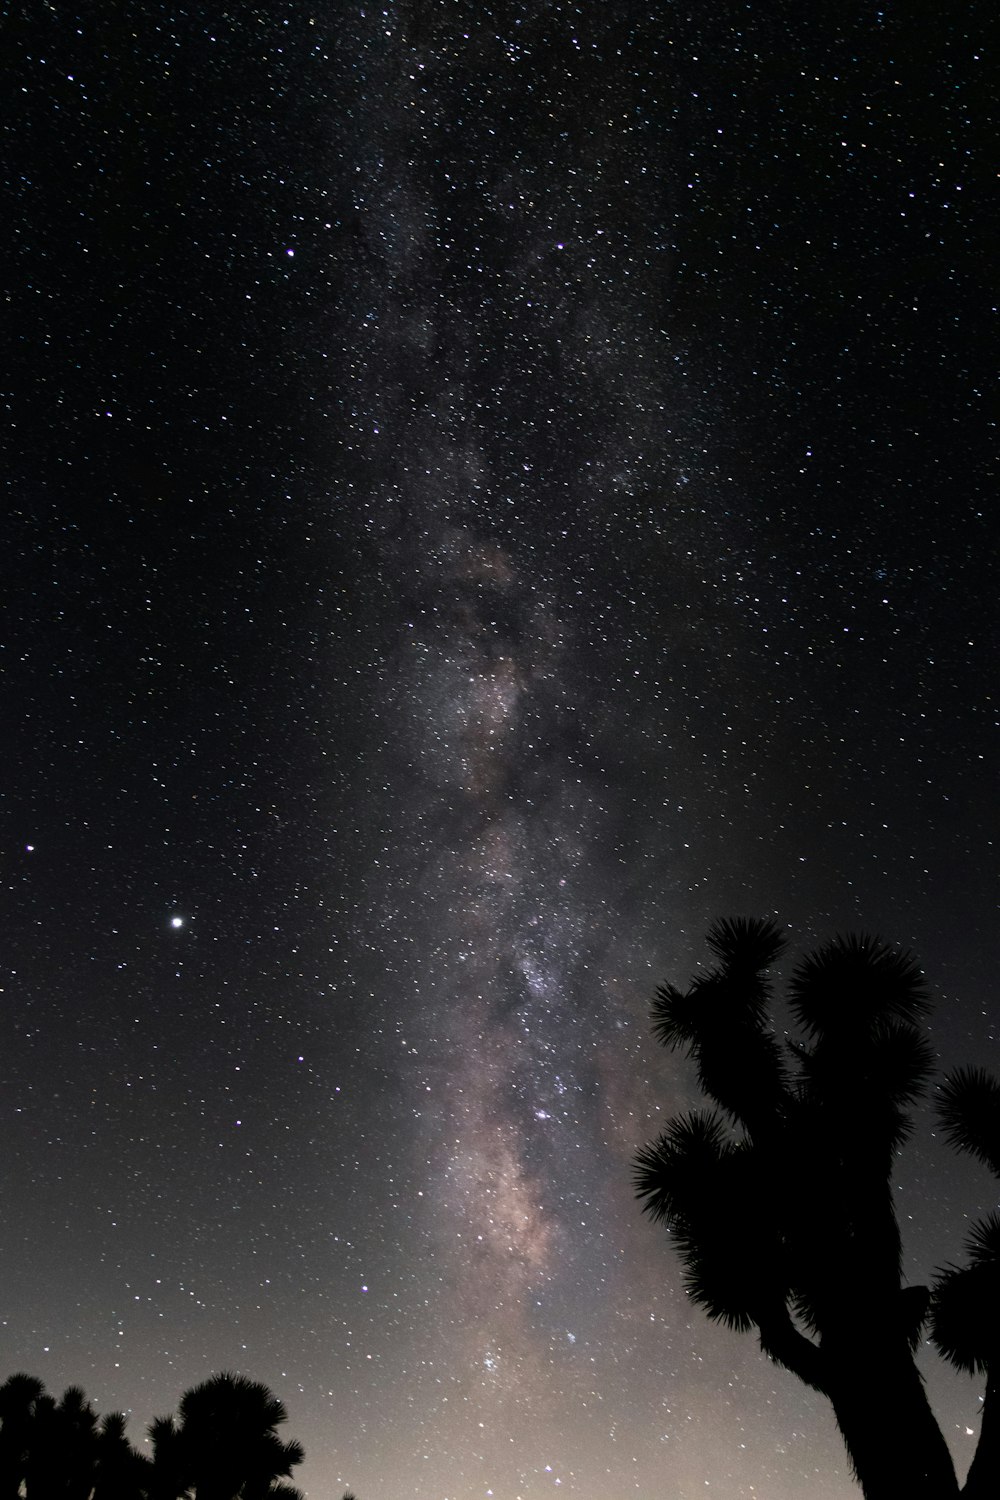 silhouette of palm tree under starry night